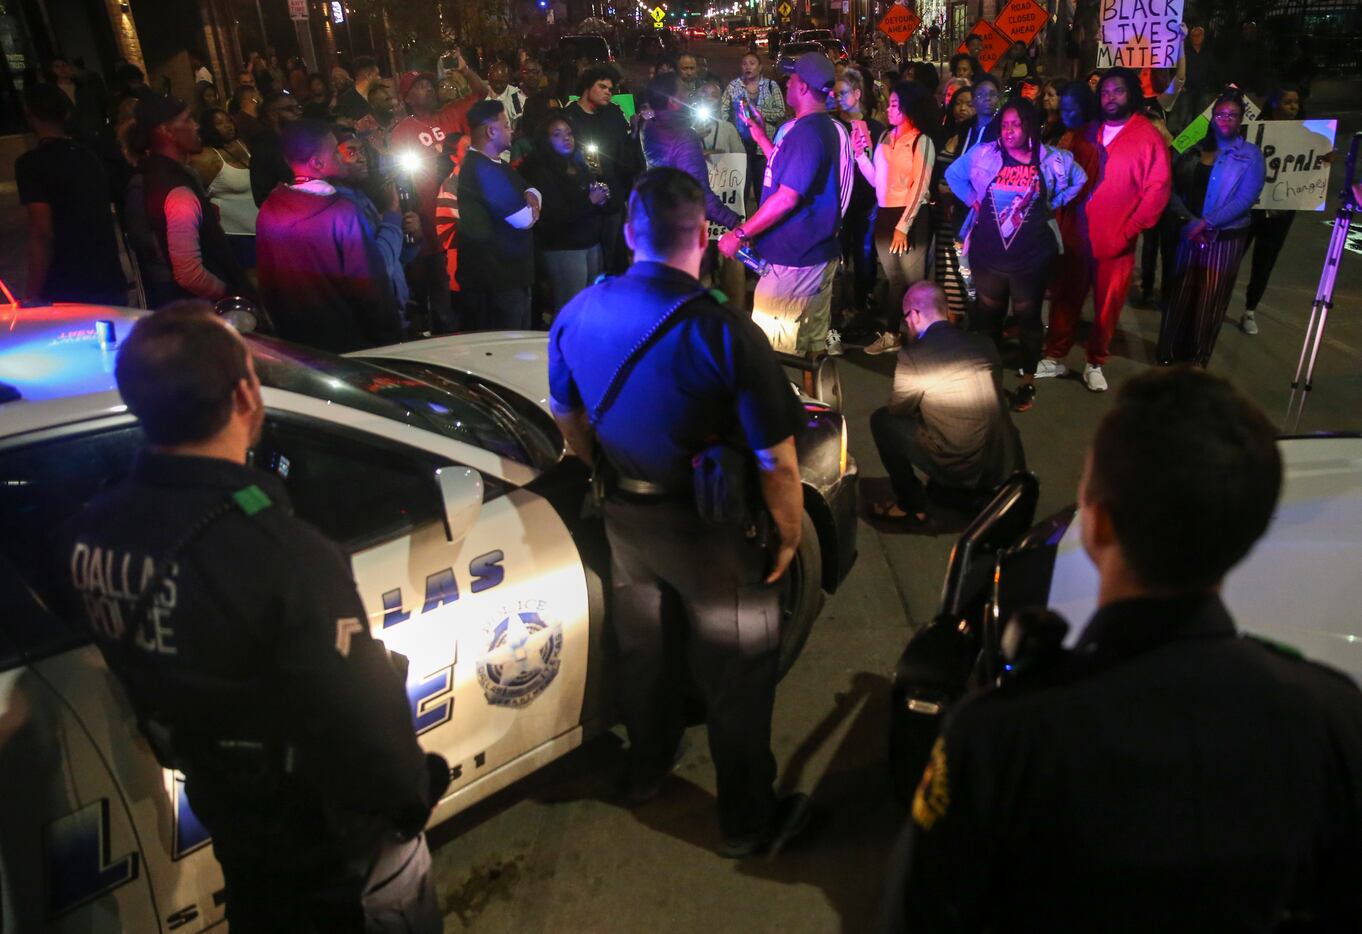 Demonstrators marching through the streets during a protest Saturday, March 23, in Dallas'...